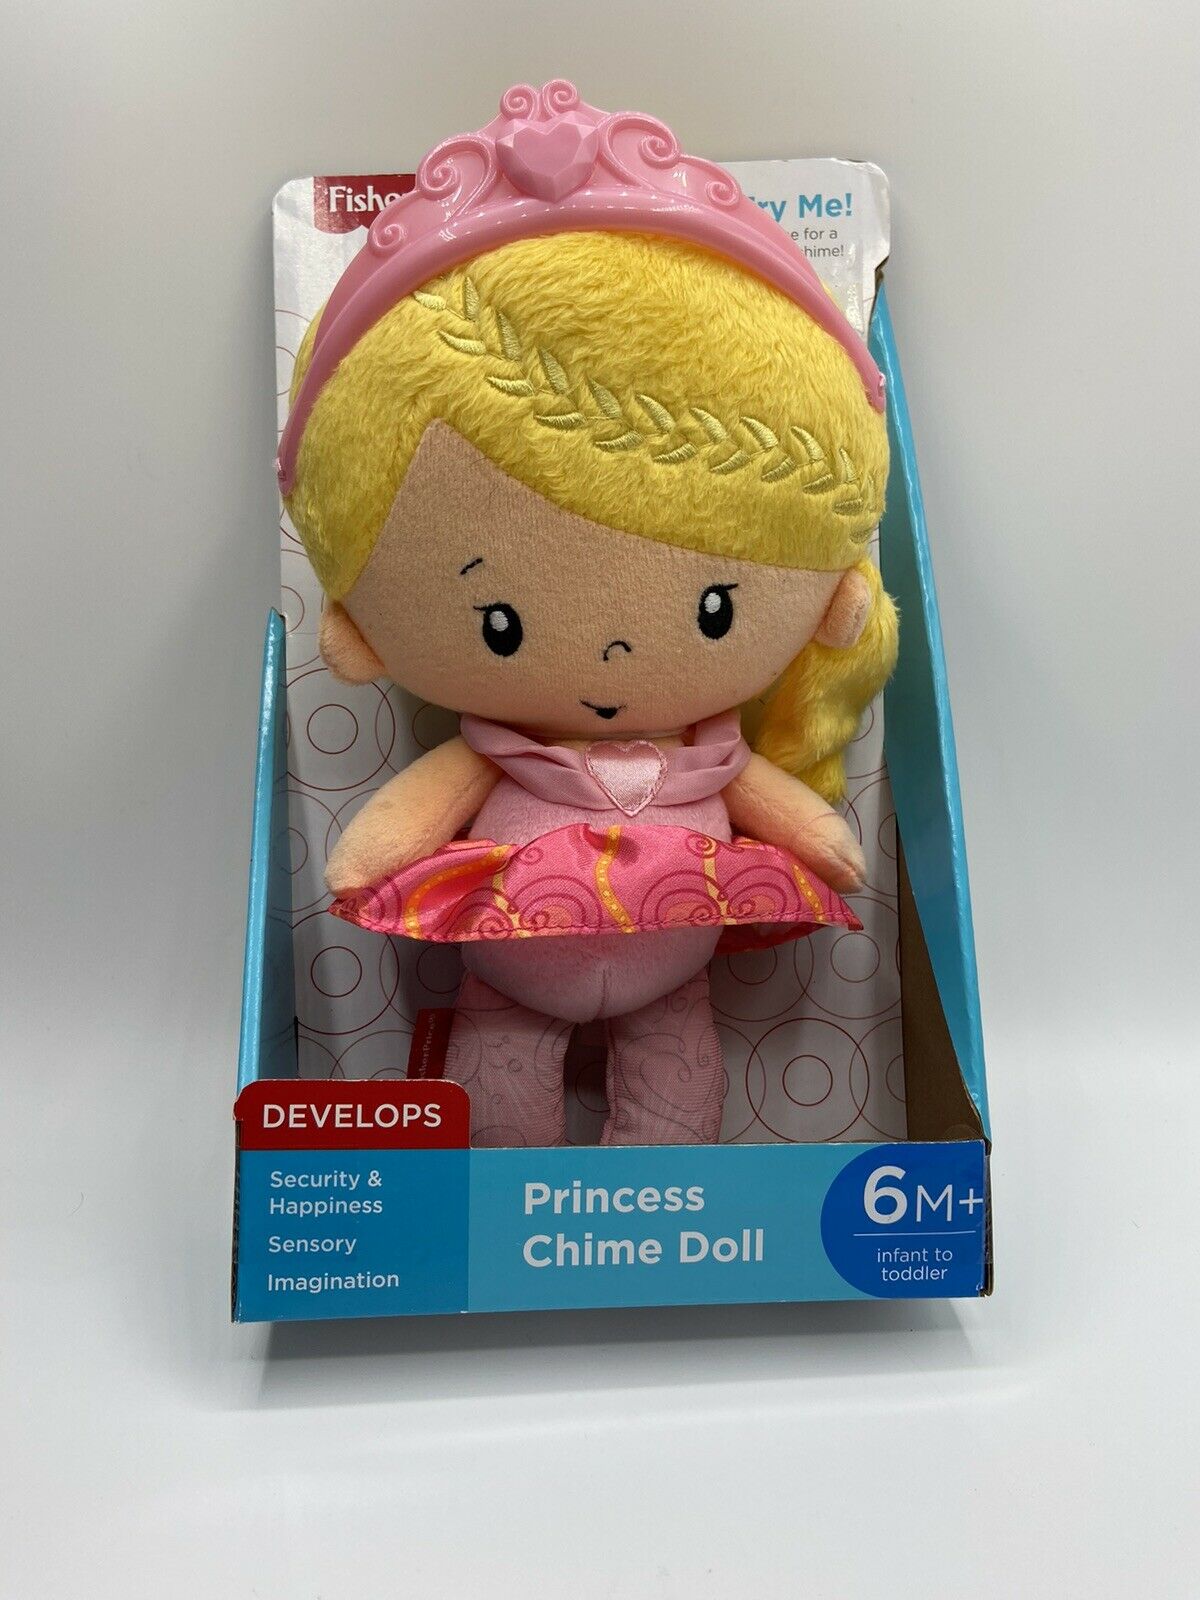 New Fisher Price Princess Chime Doll Baby Plush Toy Free Shipping